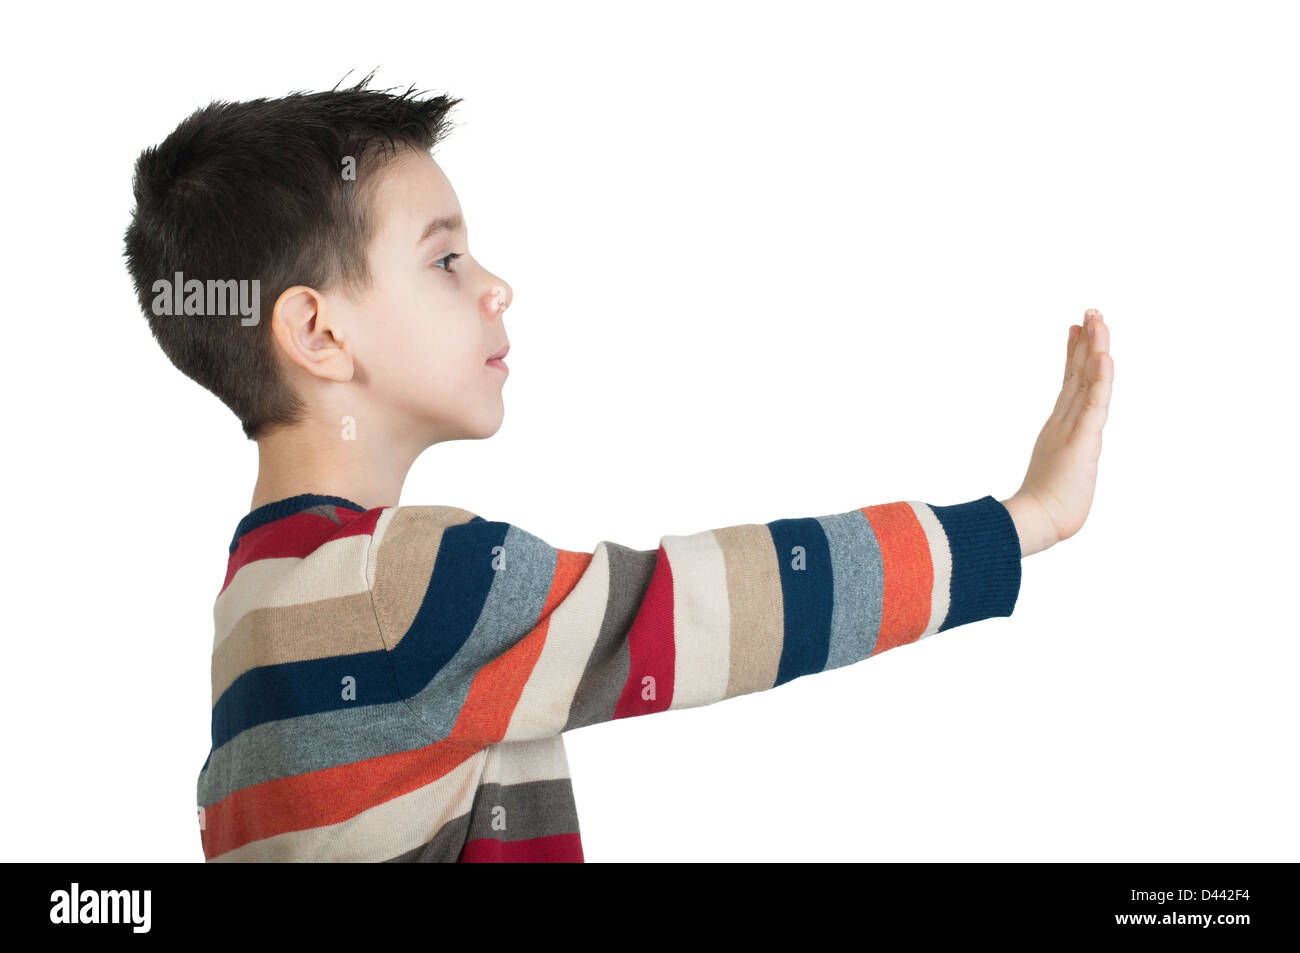 Child showing stop symbol. Profile position Stock Photo